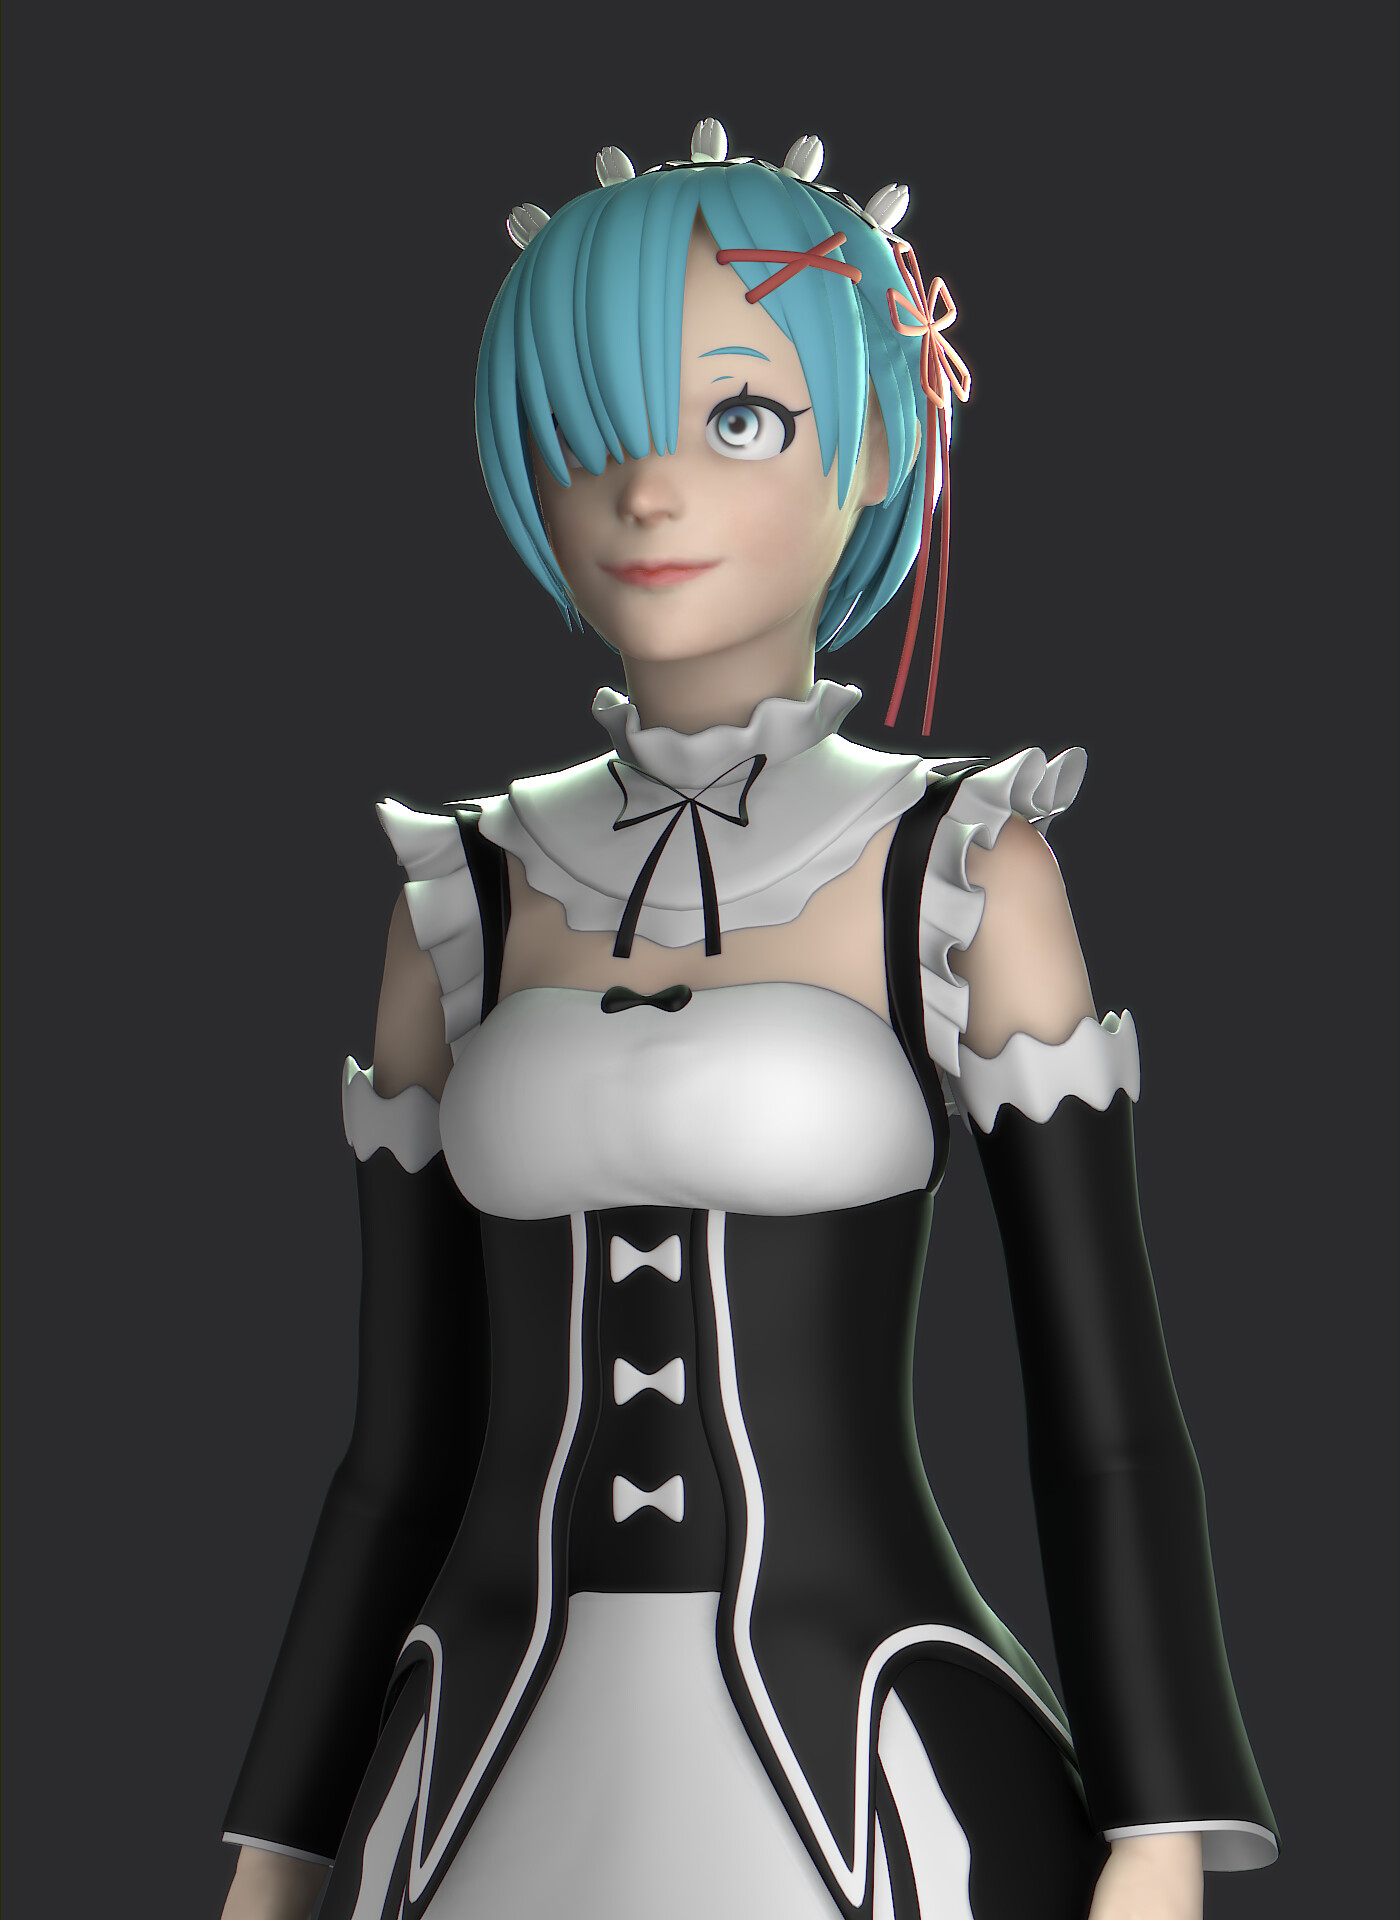 Rem - Re Zero anime 3D model animated rigged